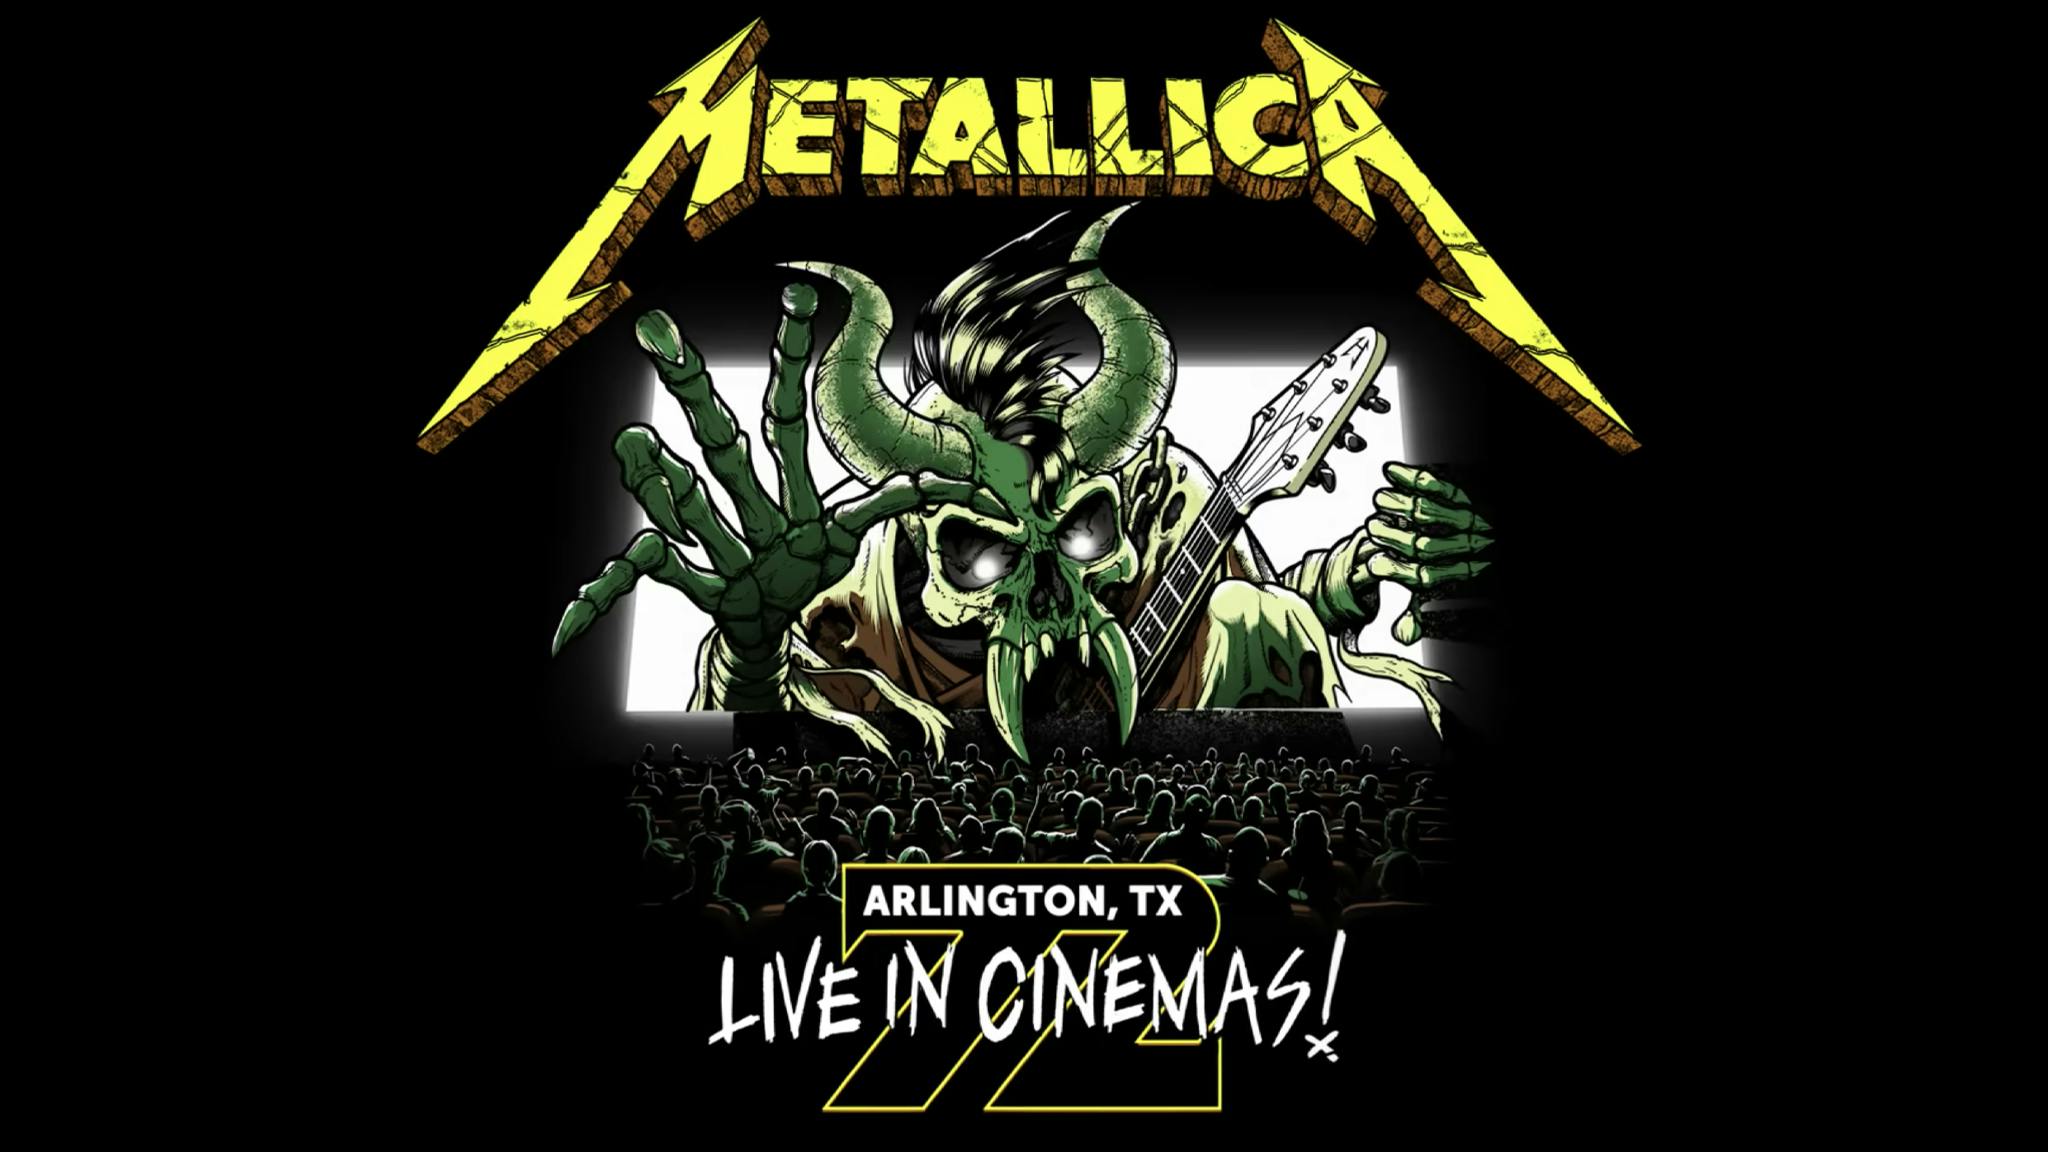 Check out the new trailer for next month’s Metallica world tour cinema event